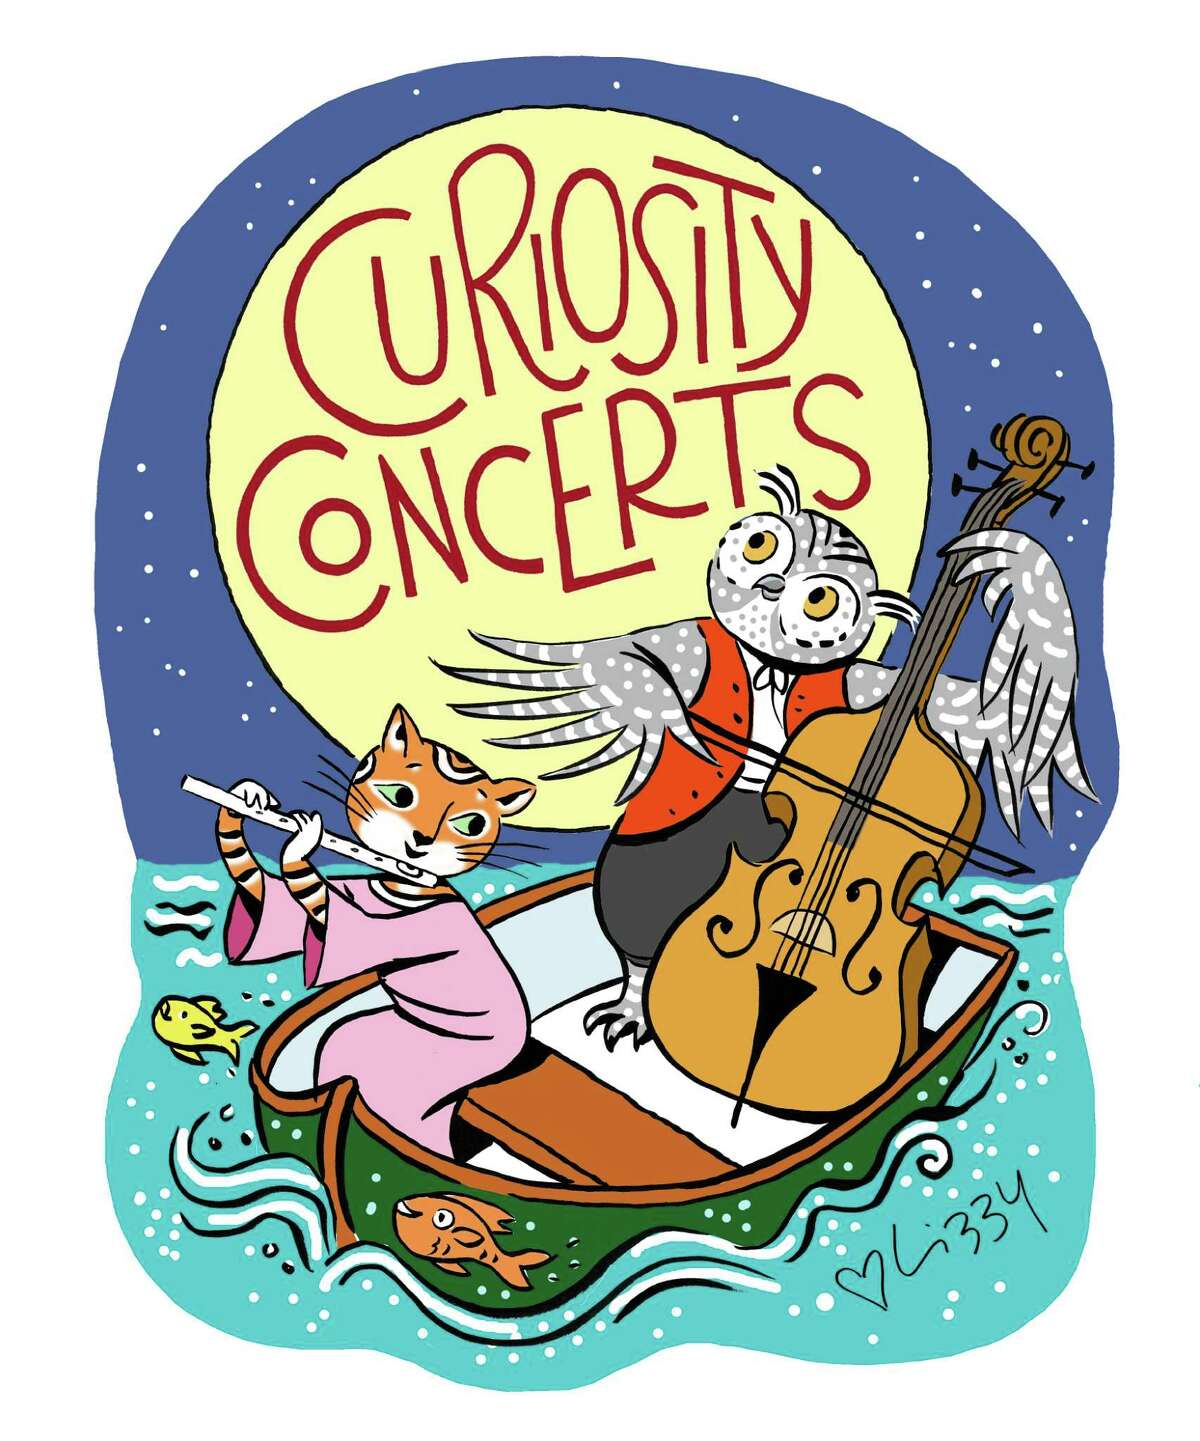 The illustration for Curiosity Concerts created by artist Lizzy Rockwell in the Old Greenwich studio of her parents, Anne and the late Harlow Rockwell.